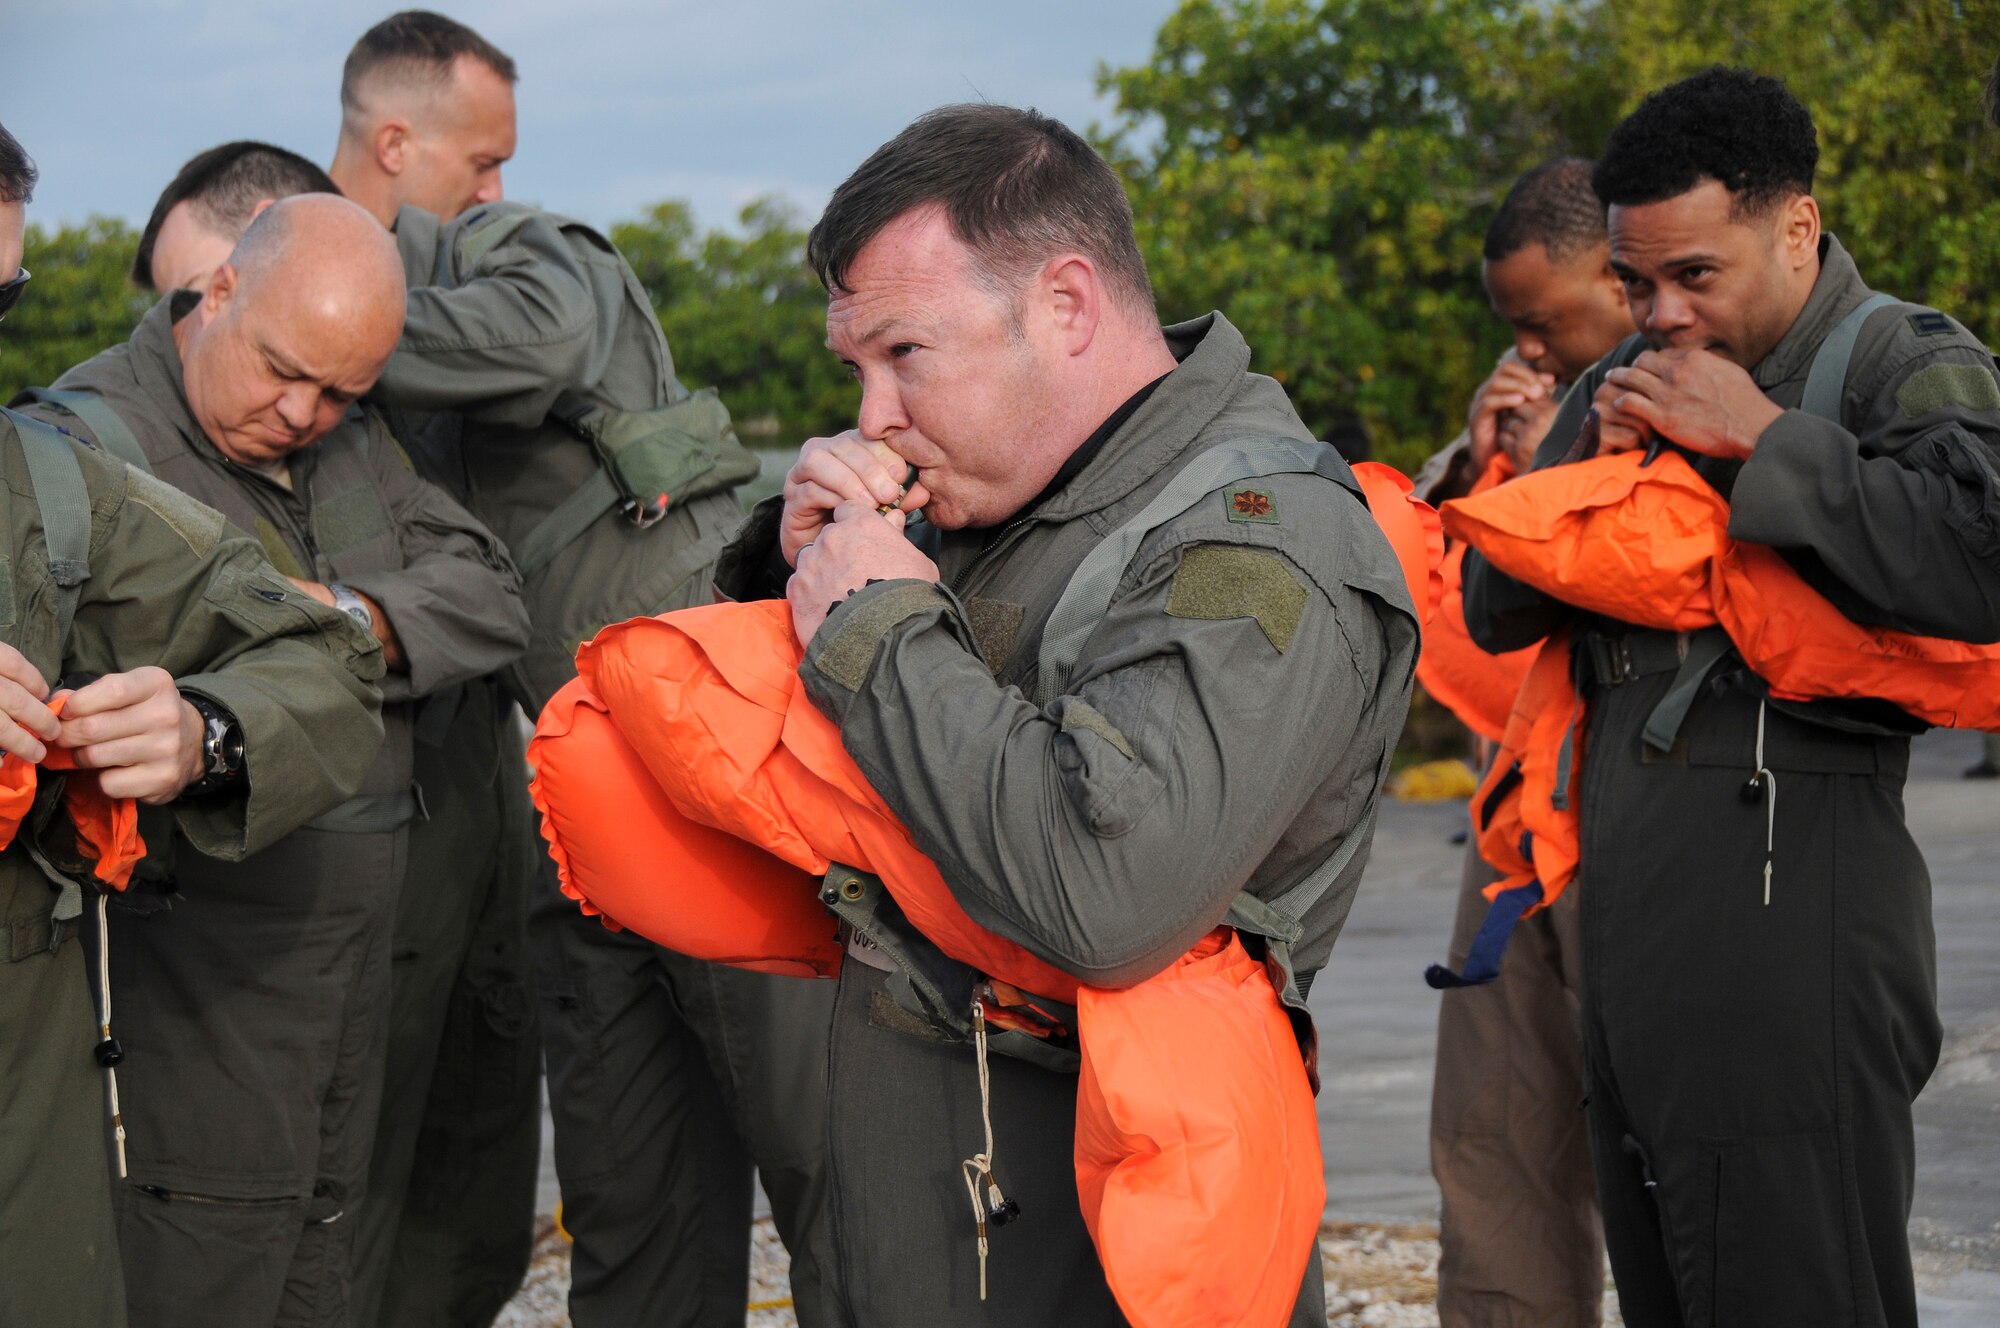 Members of the 94th Operations Group inflate flotation devices during Water Survival Training at Naval Air Station Key West, Florida March 27, 2019. During the two-day Survival, Evasion, Resistance and Escape course, members also completed Self Aid Buddy Care and combat survival. (U.S. Air Force photo/Senior Airman Justin Clayvon)